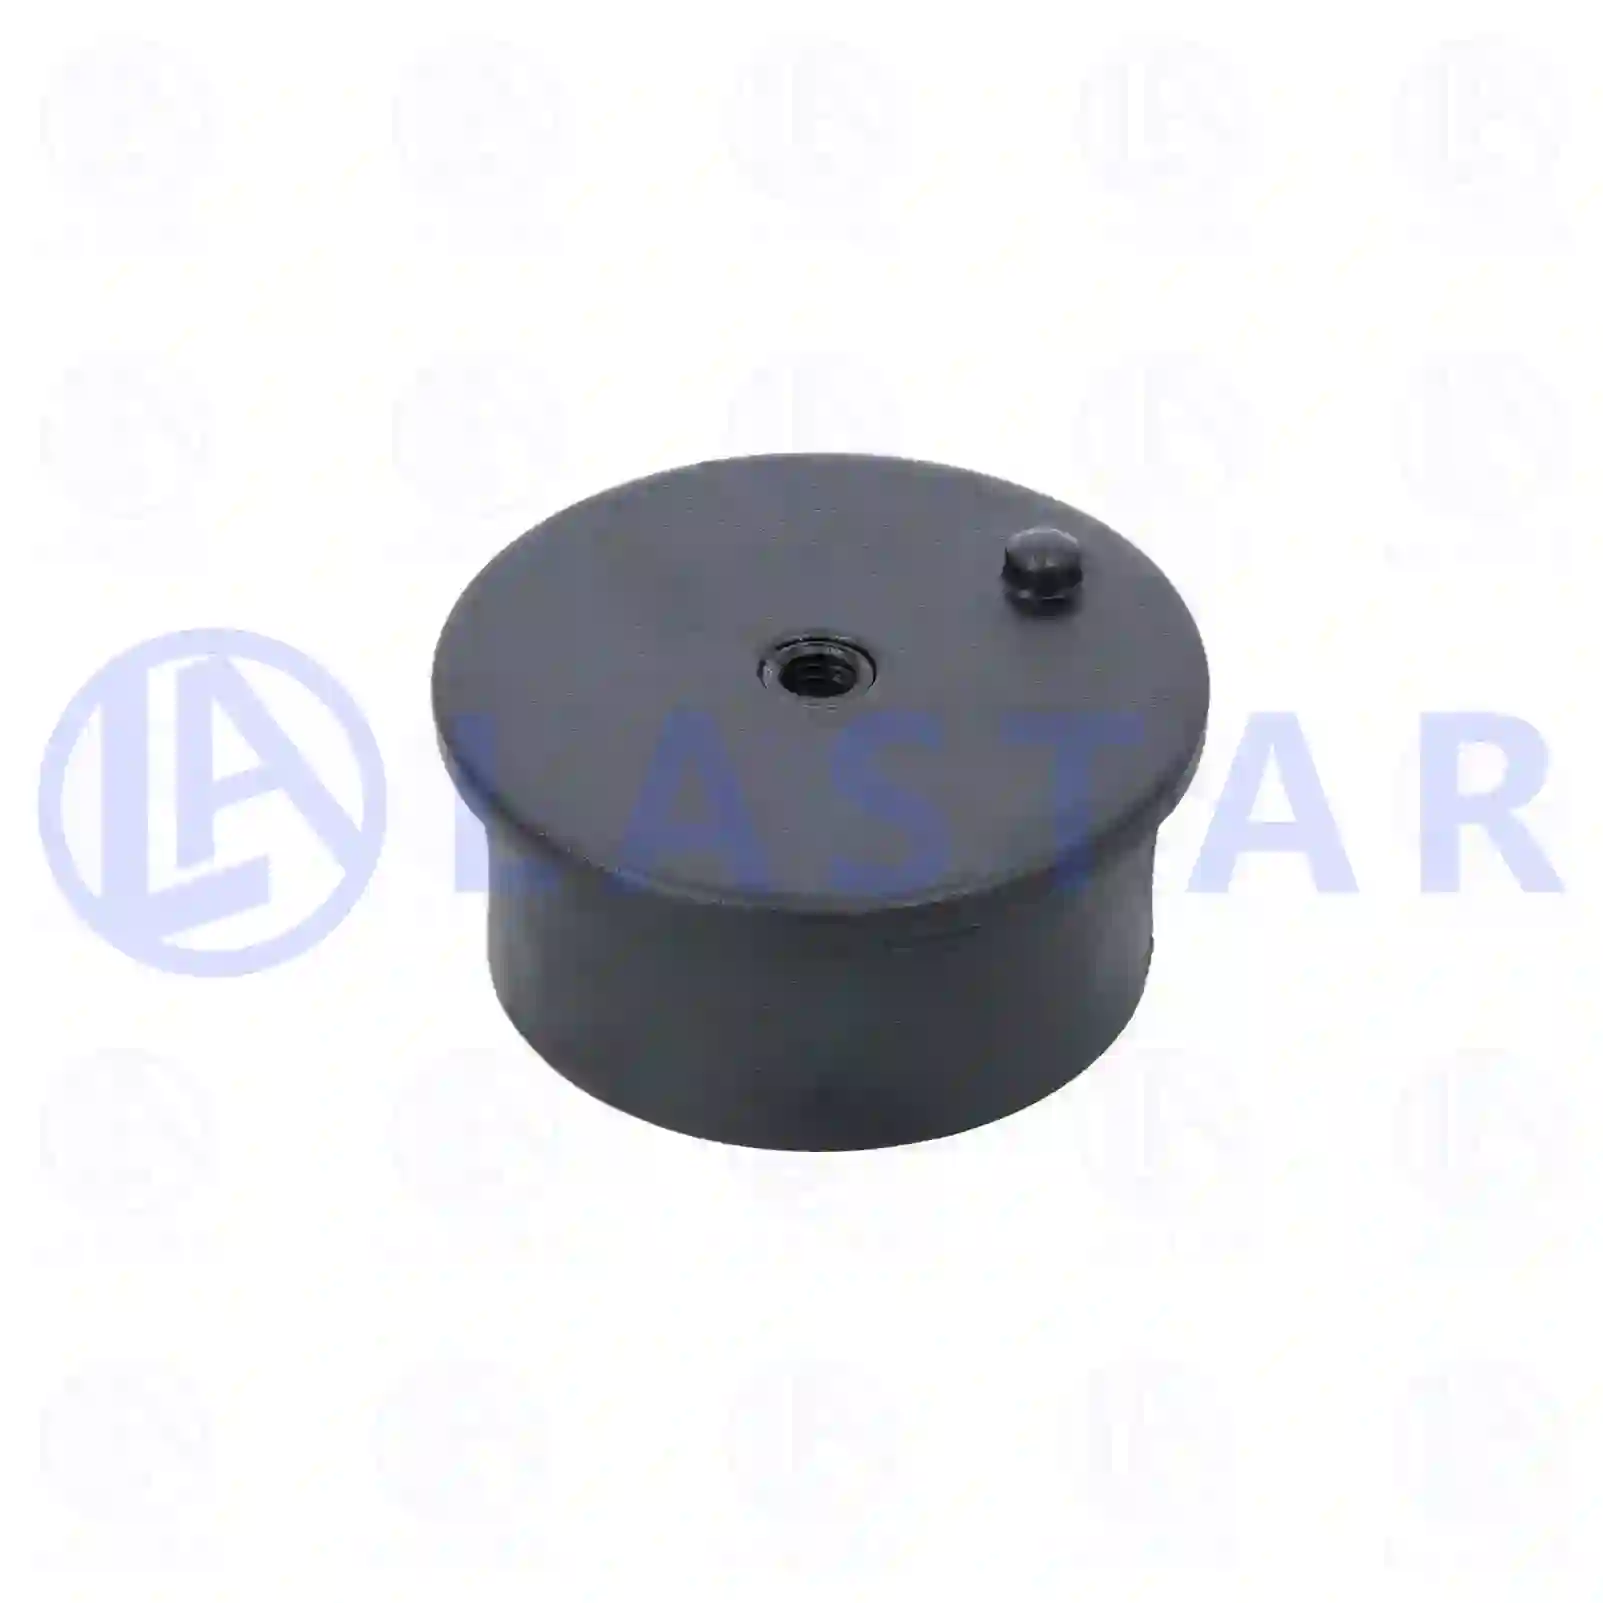 Rubber buffer, engine suspension, front, 77703538, 7420747058, 20747058, , , , ||  77703538 Lastar Spare Part | Truck Spare Parts, Auotomotive Spare Parts Rubber buffer, engine suspension, front, 77703538, 7420747058, 20747058, , , , ||  77703538 Lastar Spare Part | Truck Spare Parts, Auotomotive Spare Parts